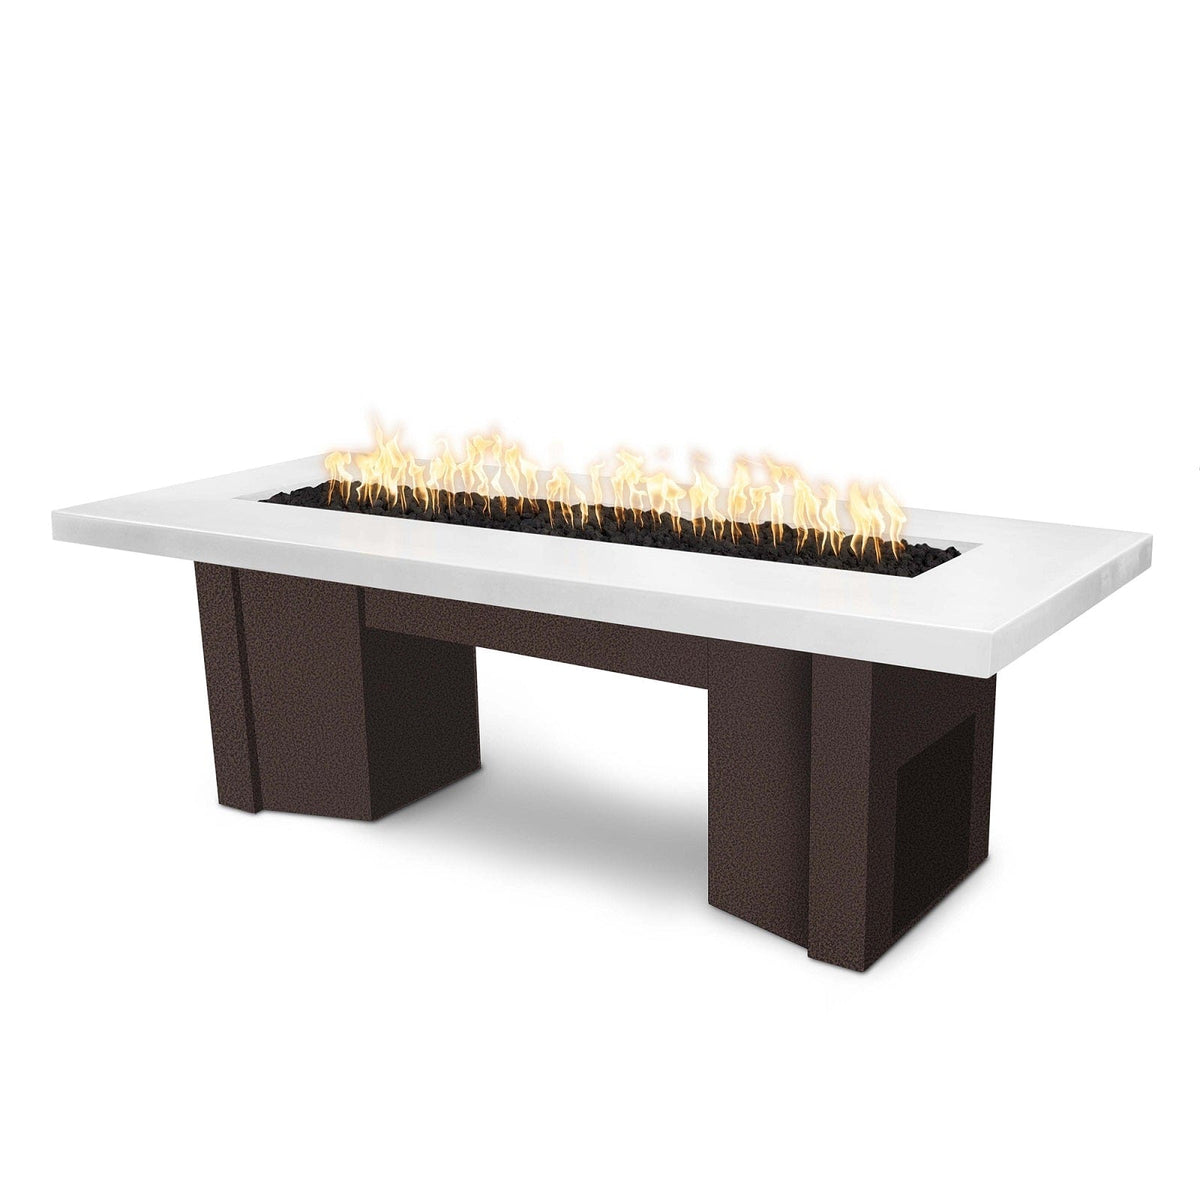 The Outdoor Plus Fire Features Limestone (-LIM) / Copper Vein Powder Coated Steel (-CPV) The Outdoor Plus 78&quot; Alameda Fire Table Smooth Concrete in Liquid Propane - Match Lit with Flame Sense System / OPT-ALMGFRC78FSML-LP